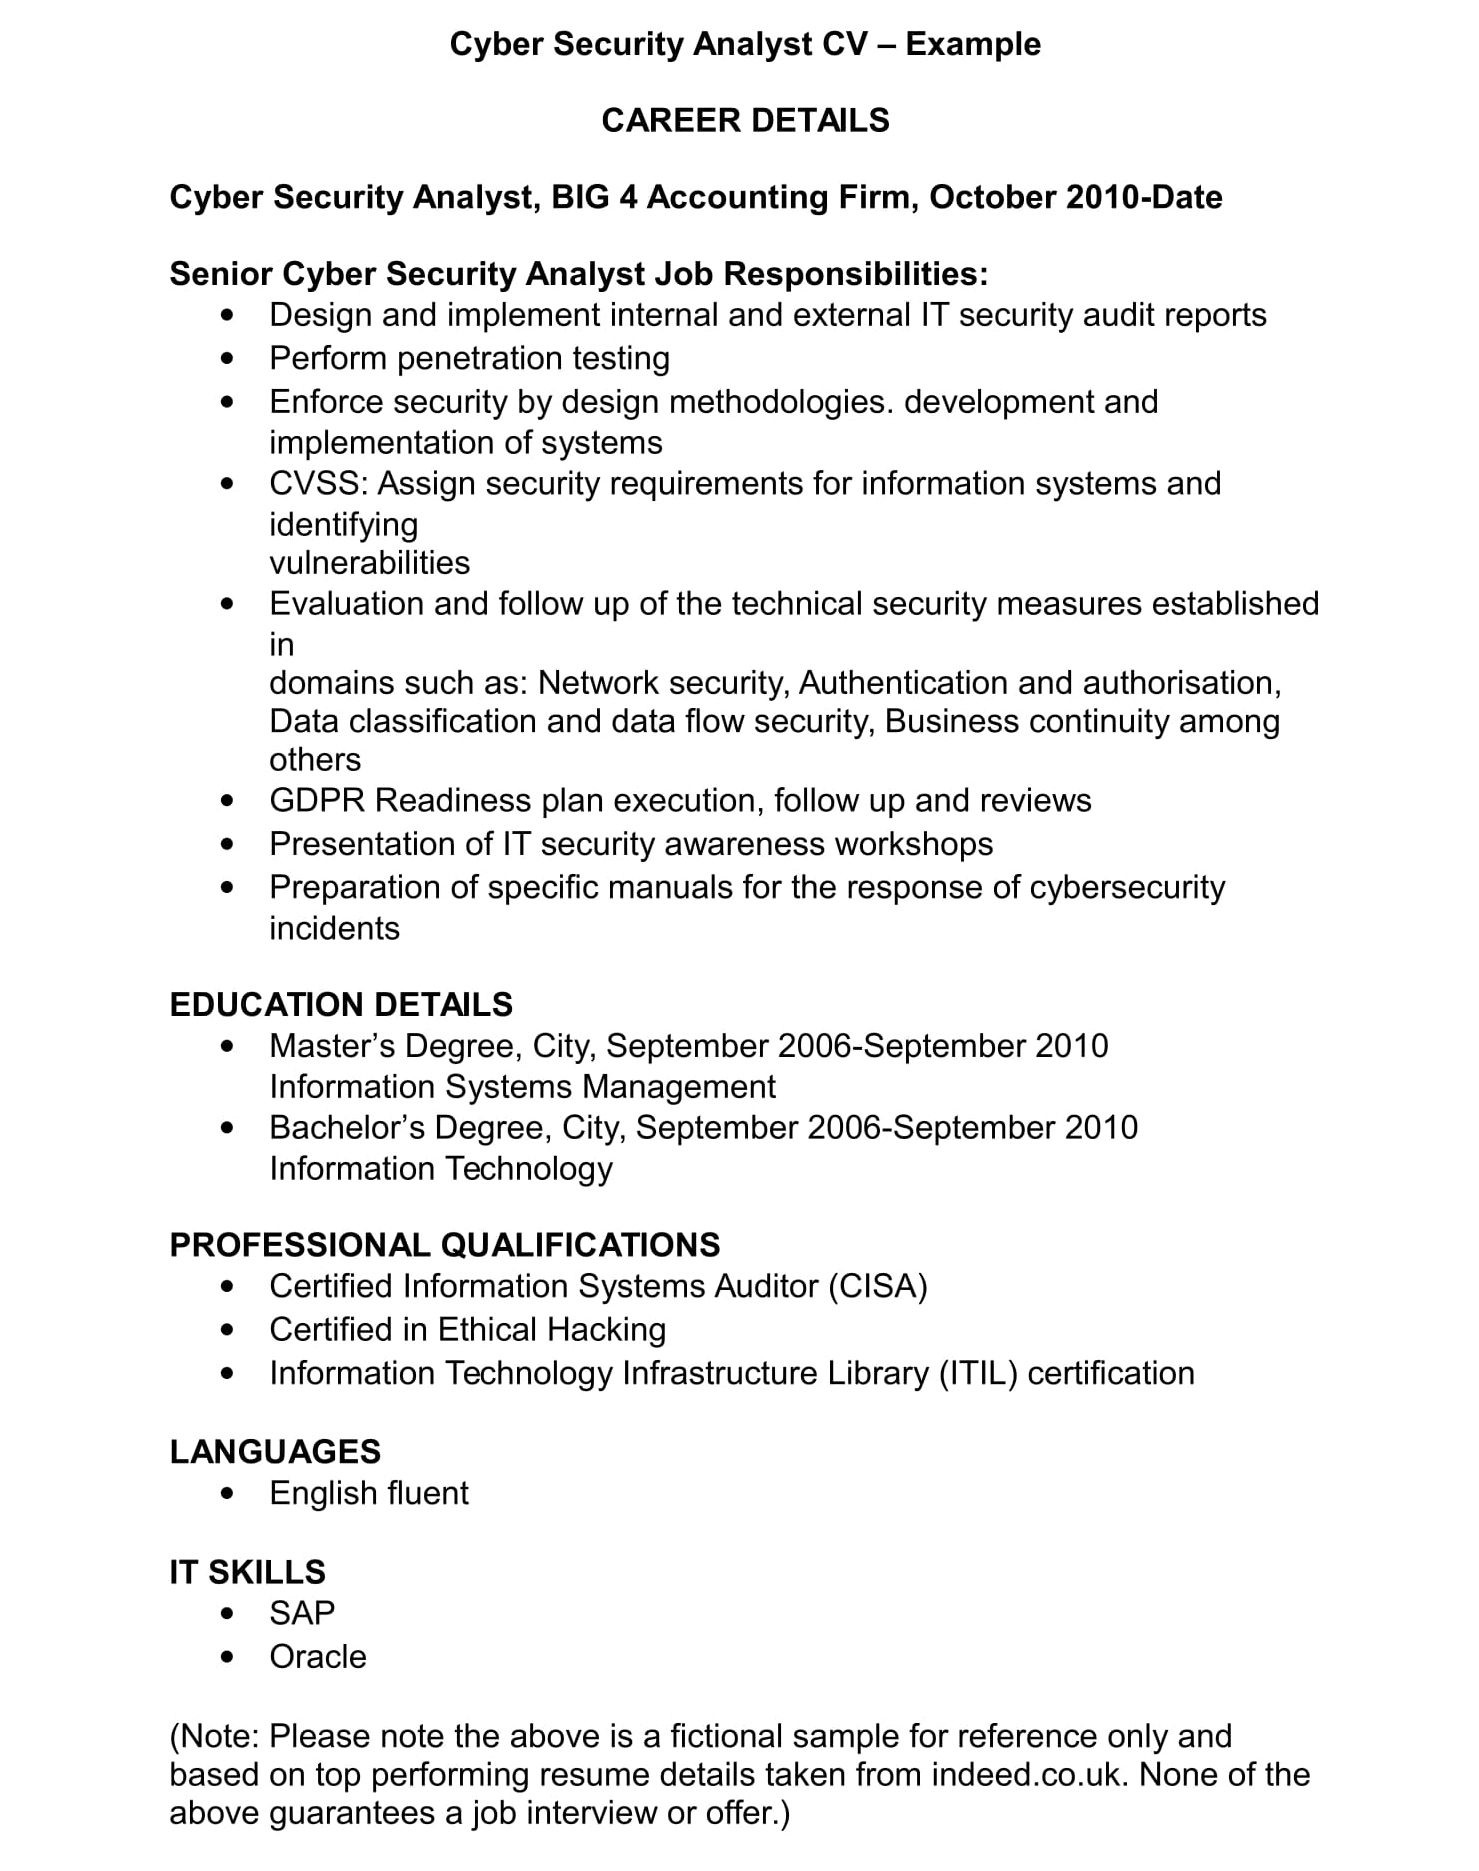 Sample Resume Of Cyber Security Analyst Cyber Security Cv Template Examples Audit, Finance Management